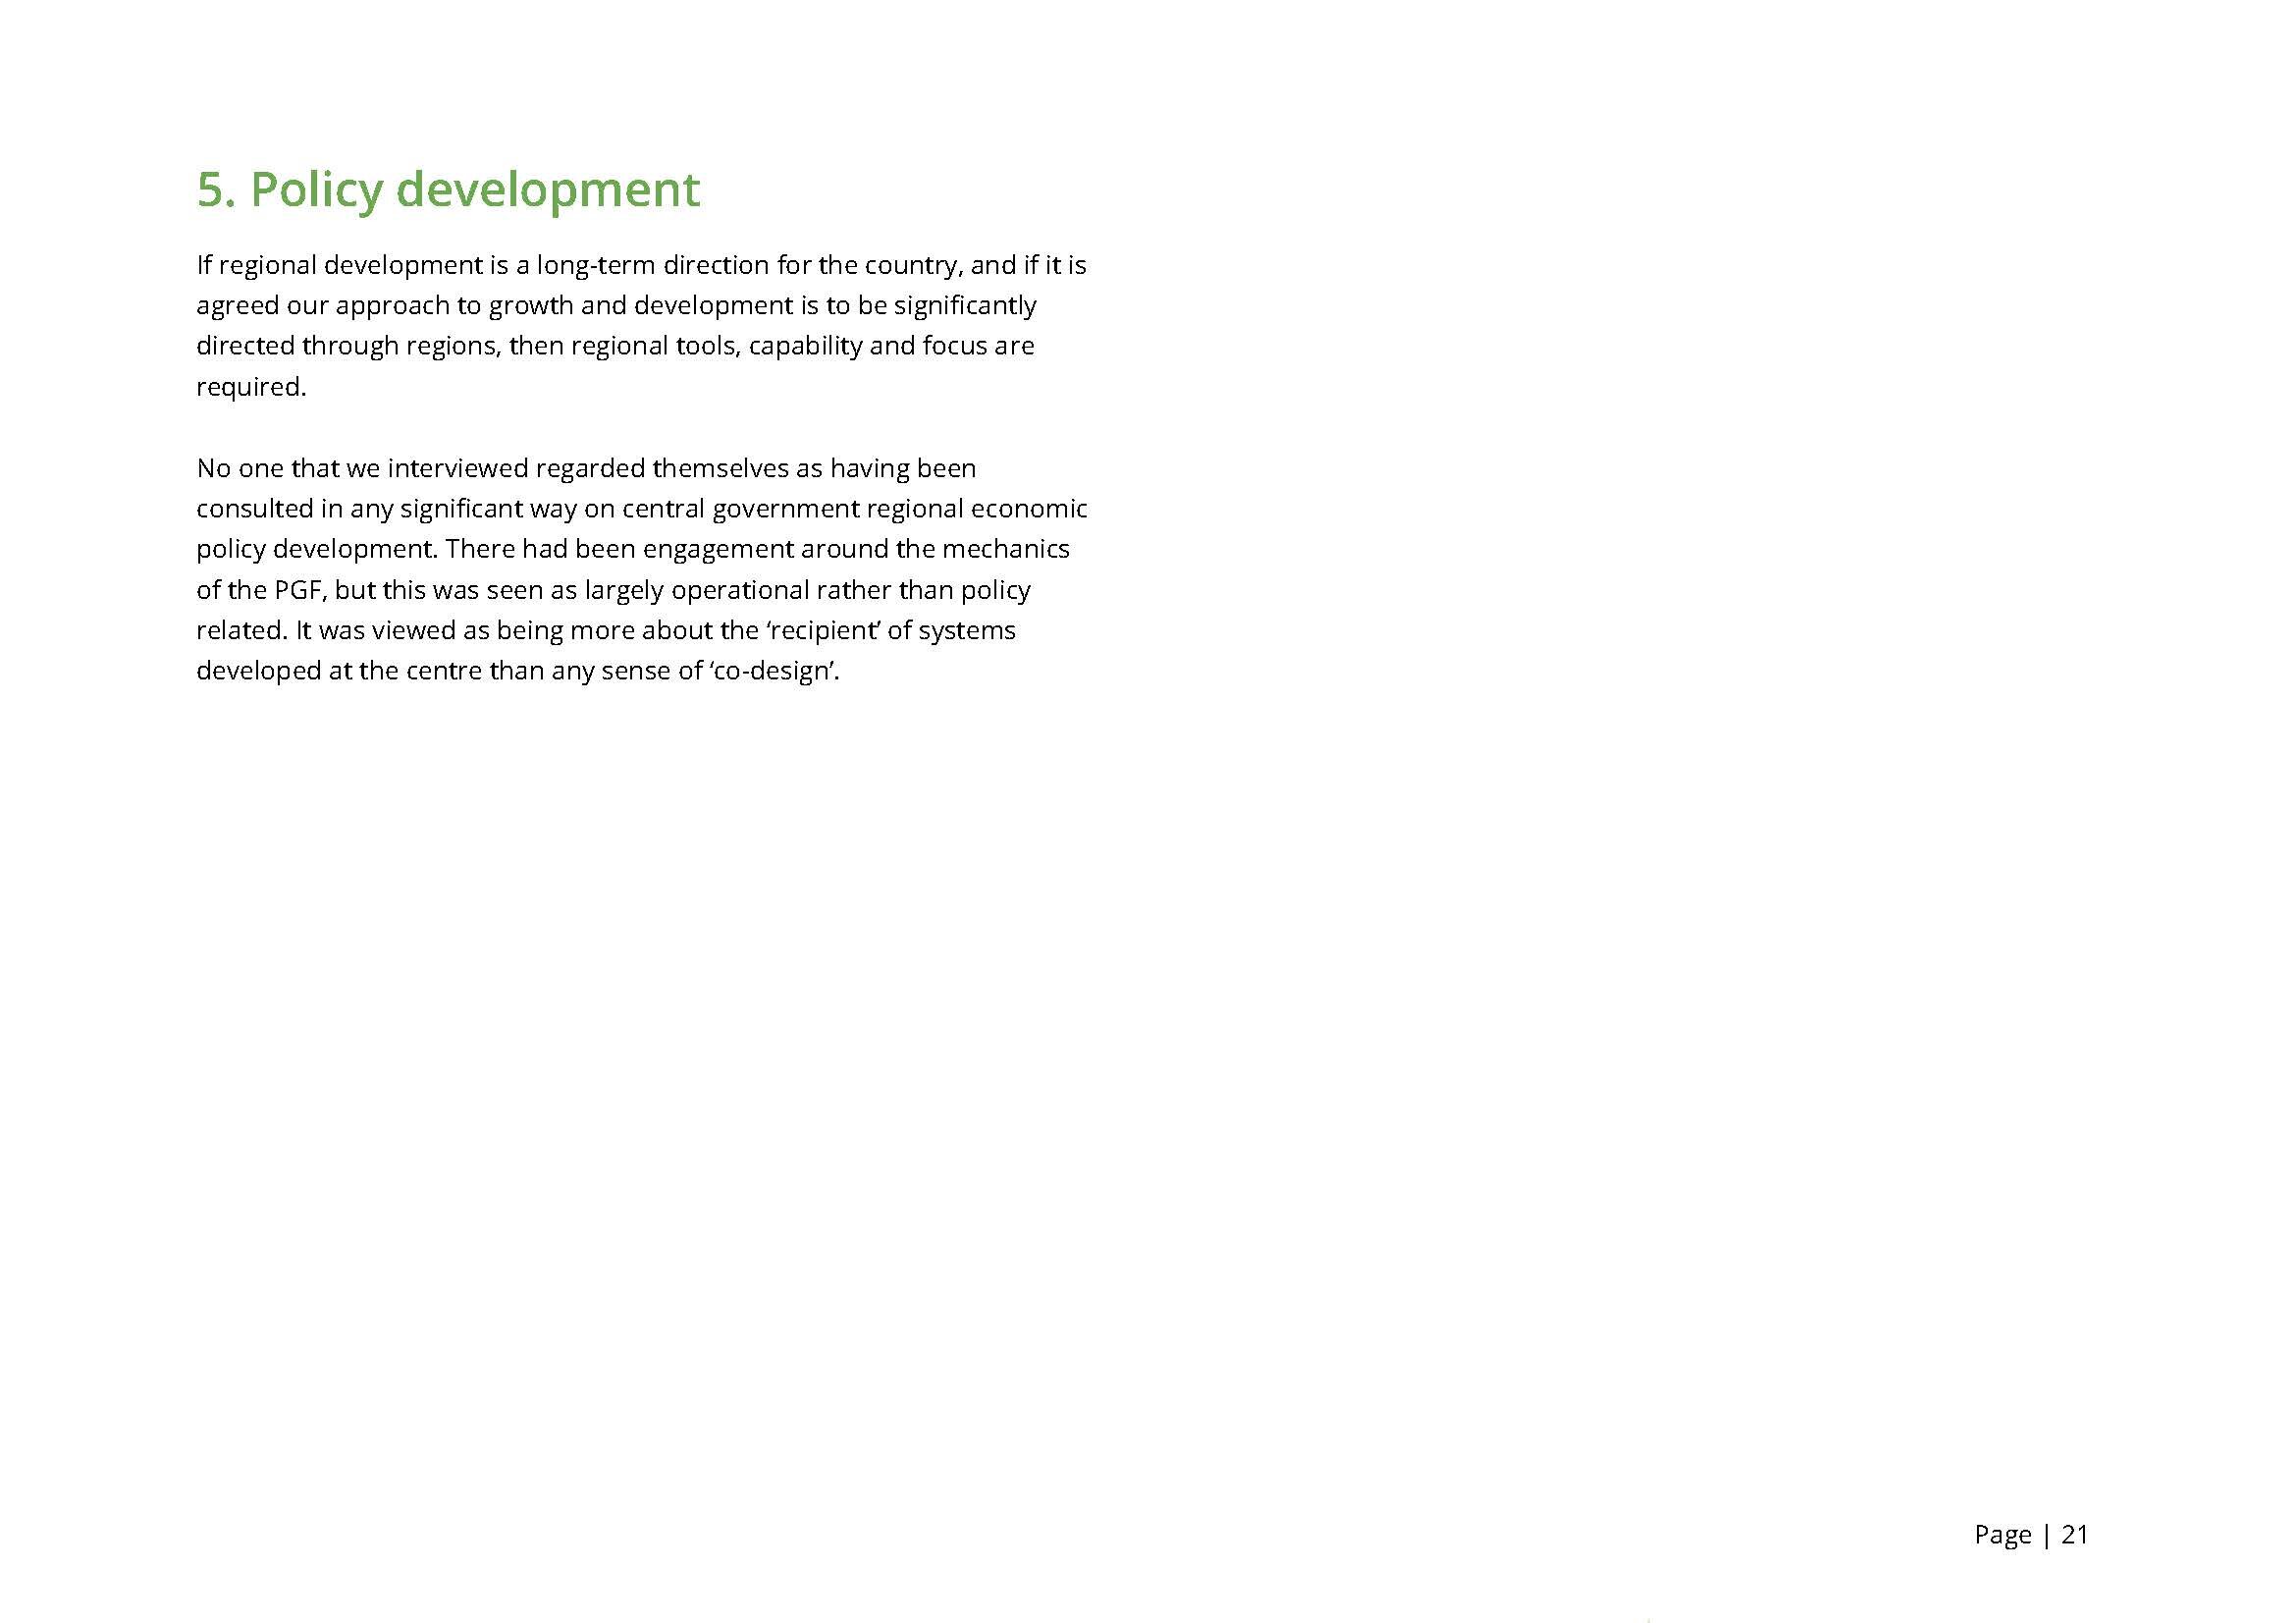 Future Challenges and Opportunities in Economic Development, HenleyHutchings TEST_Page_21.jpg